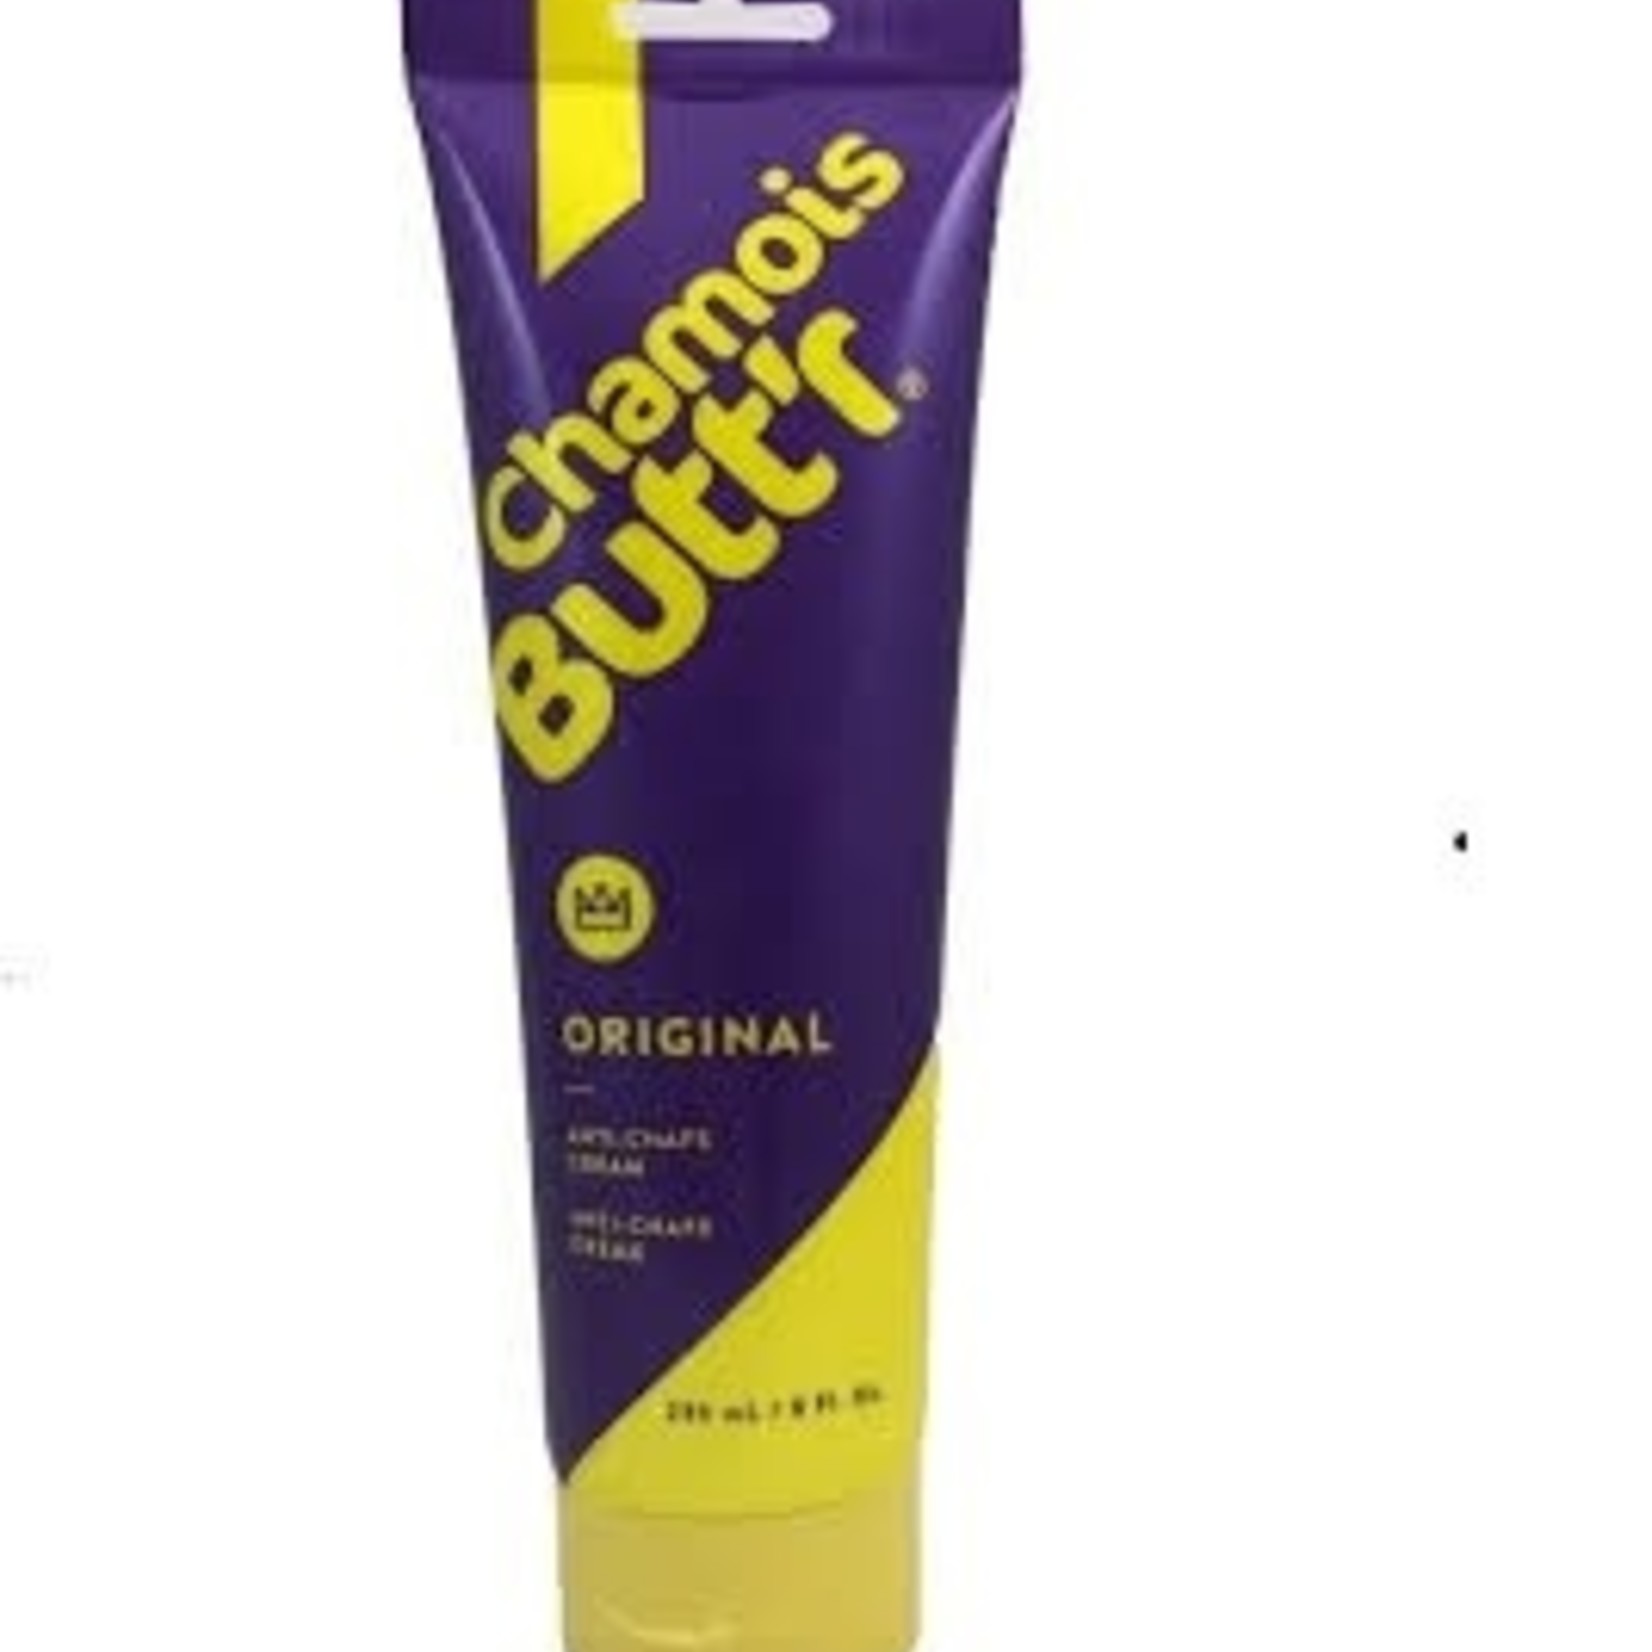 Paceline Products Skin Care Chamois Buttr 8 Oz Tube single